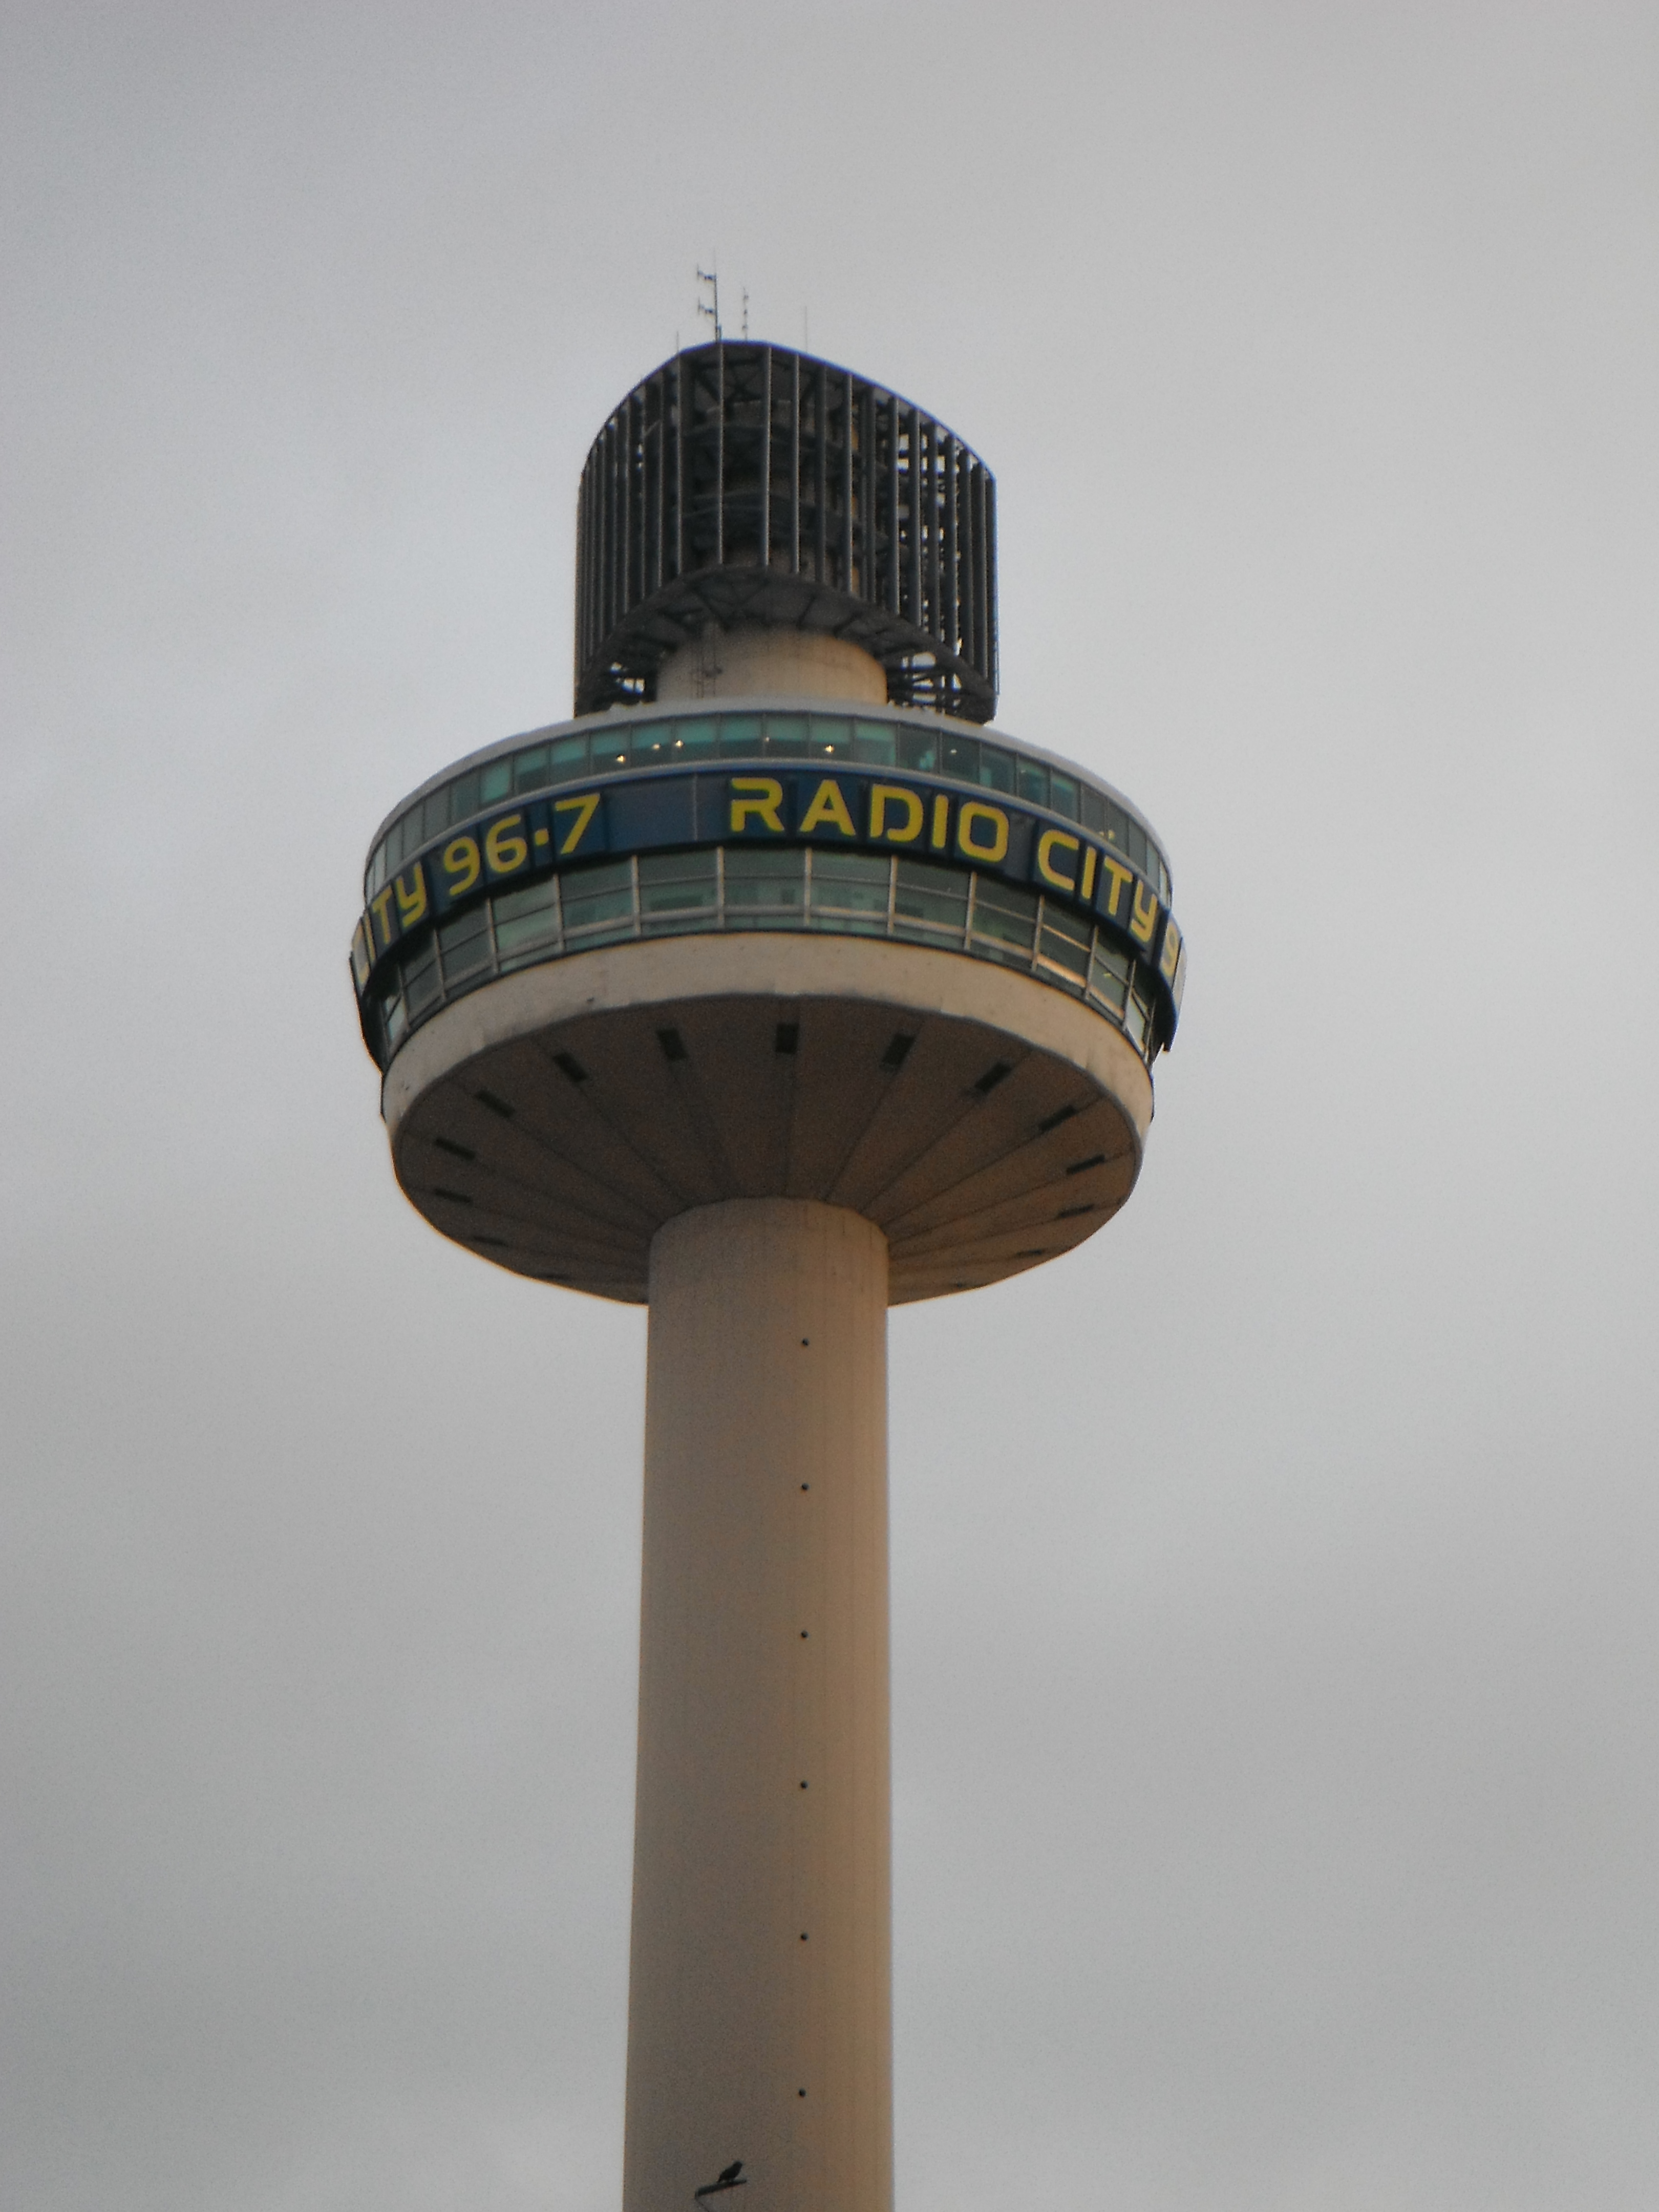 Photo taken by me – Liverpool  Radio City Tower 